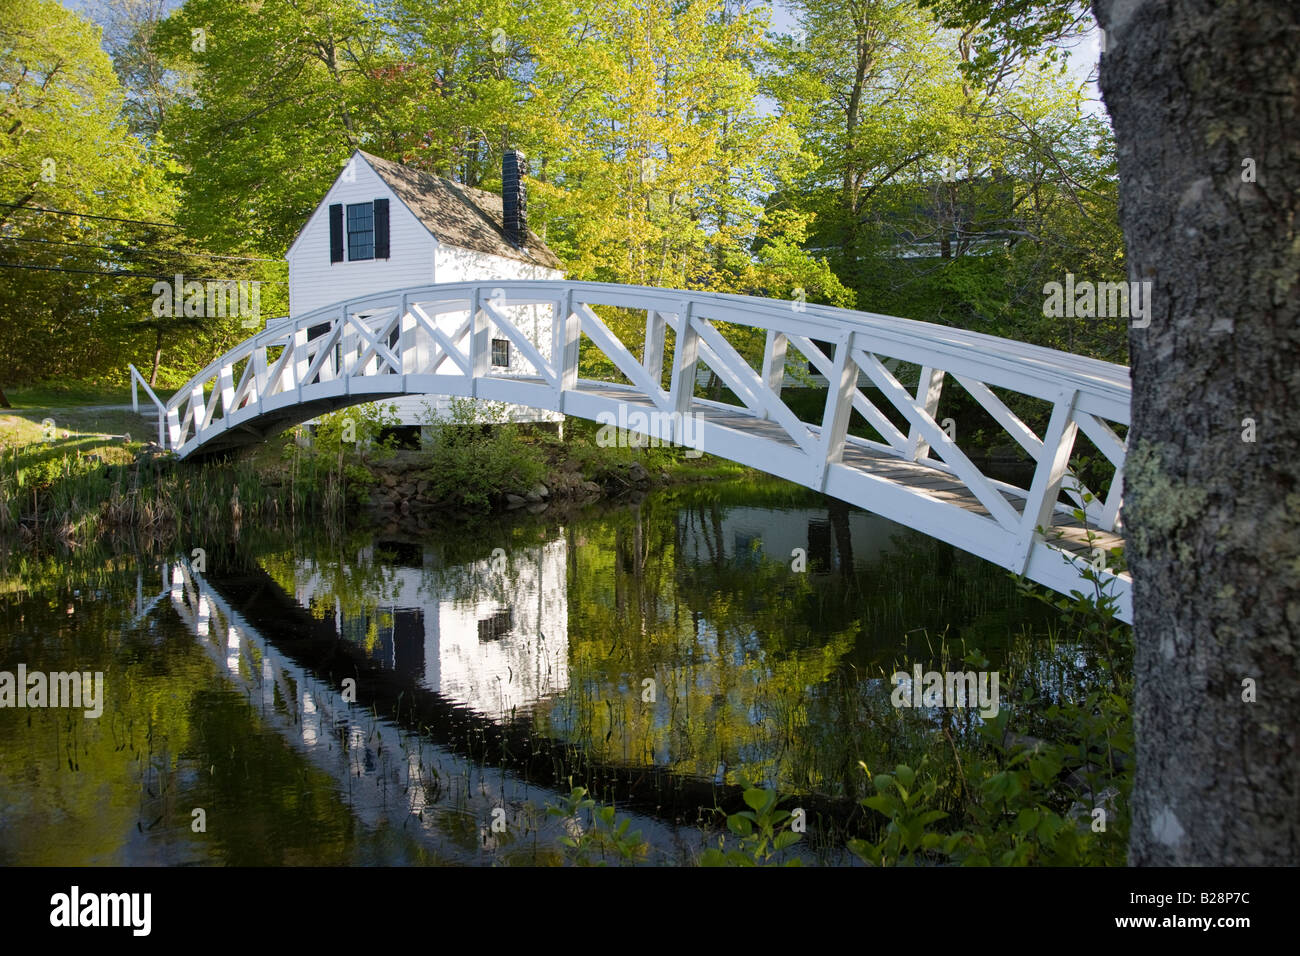 Wooden foot bridge over a pond, Somesville, ME Stock Photo